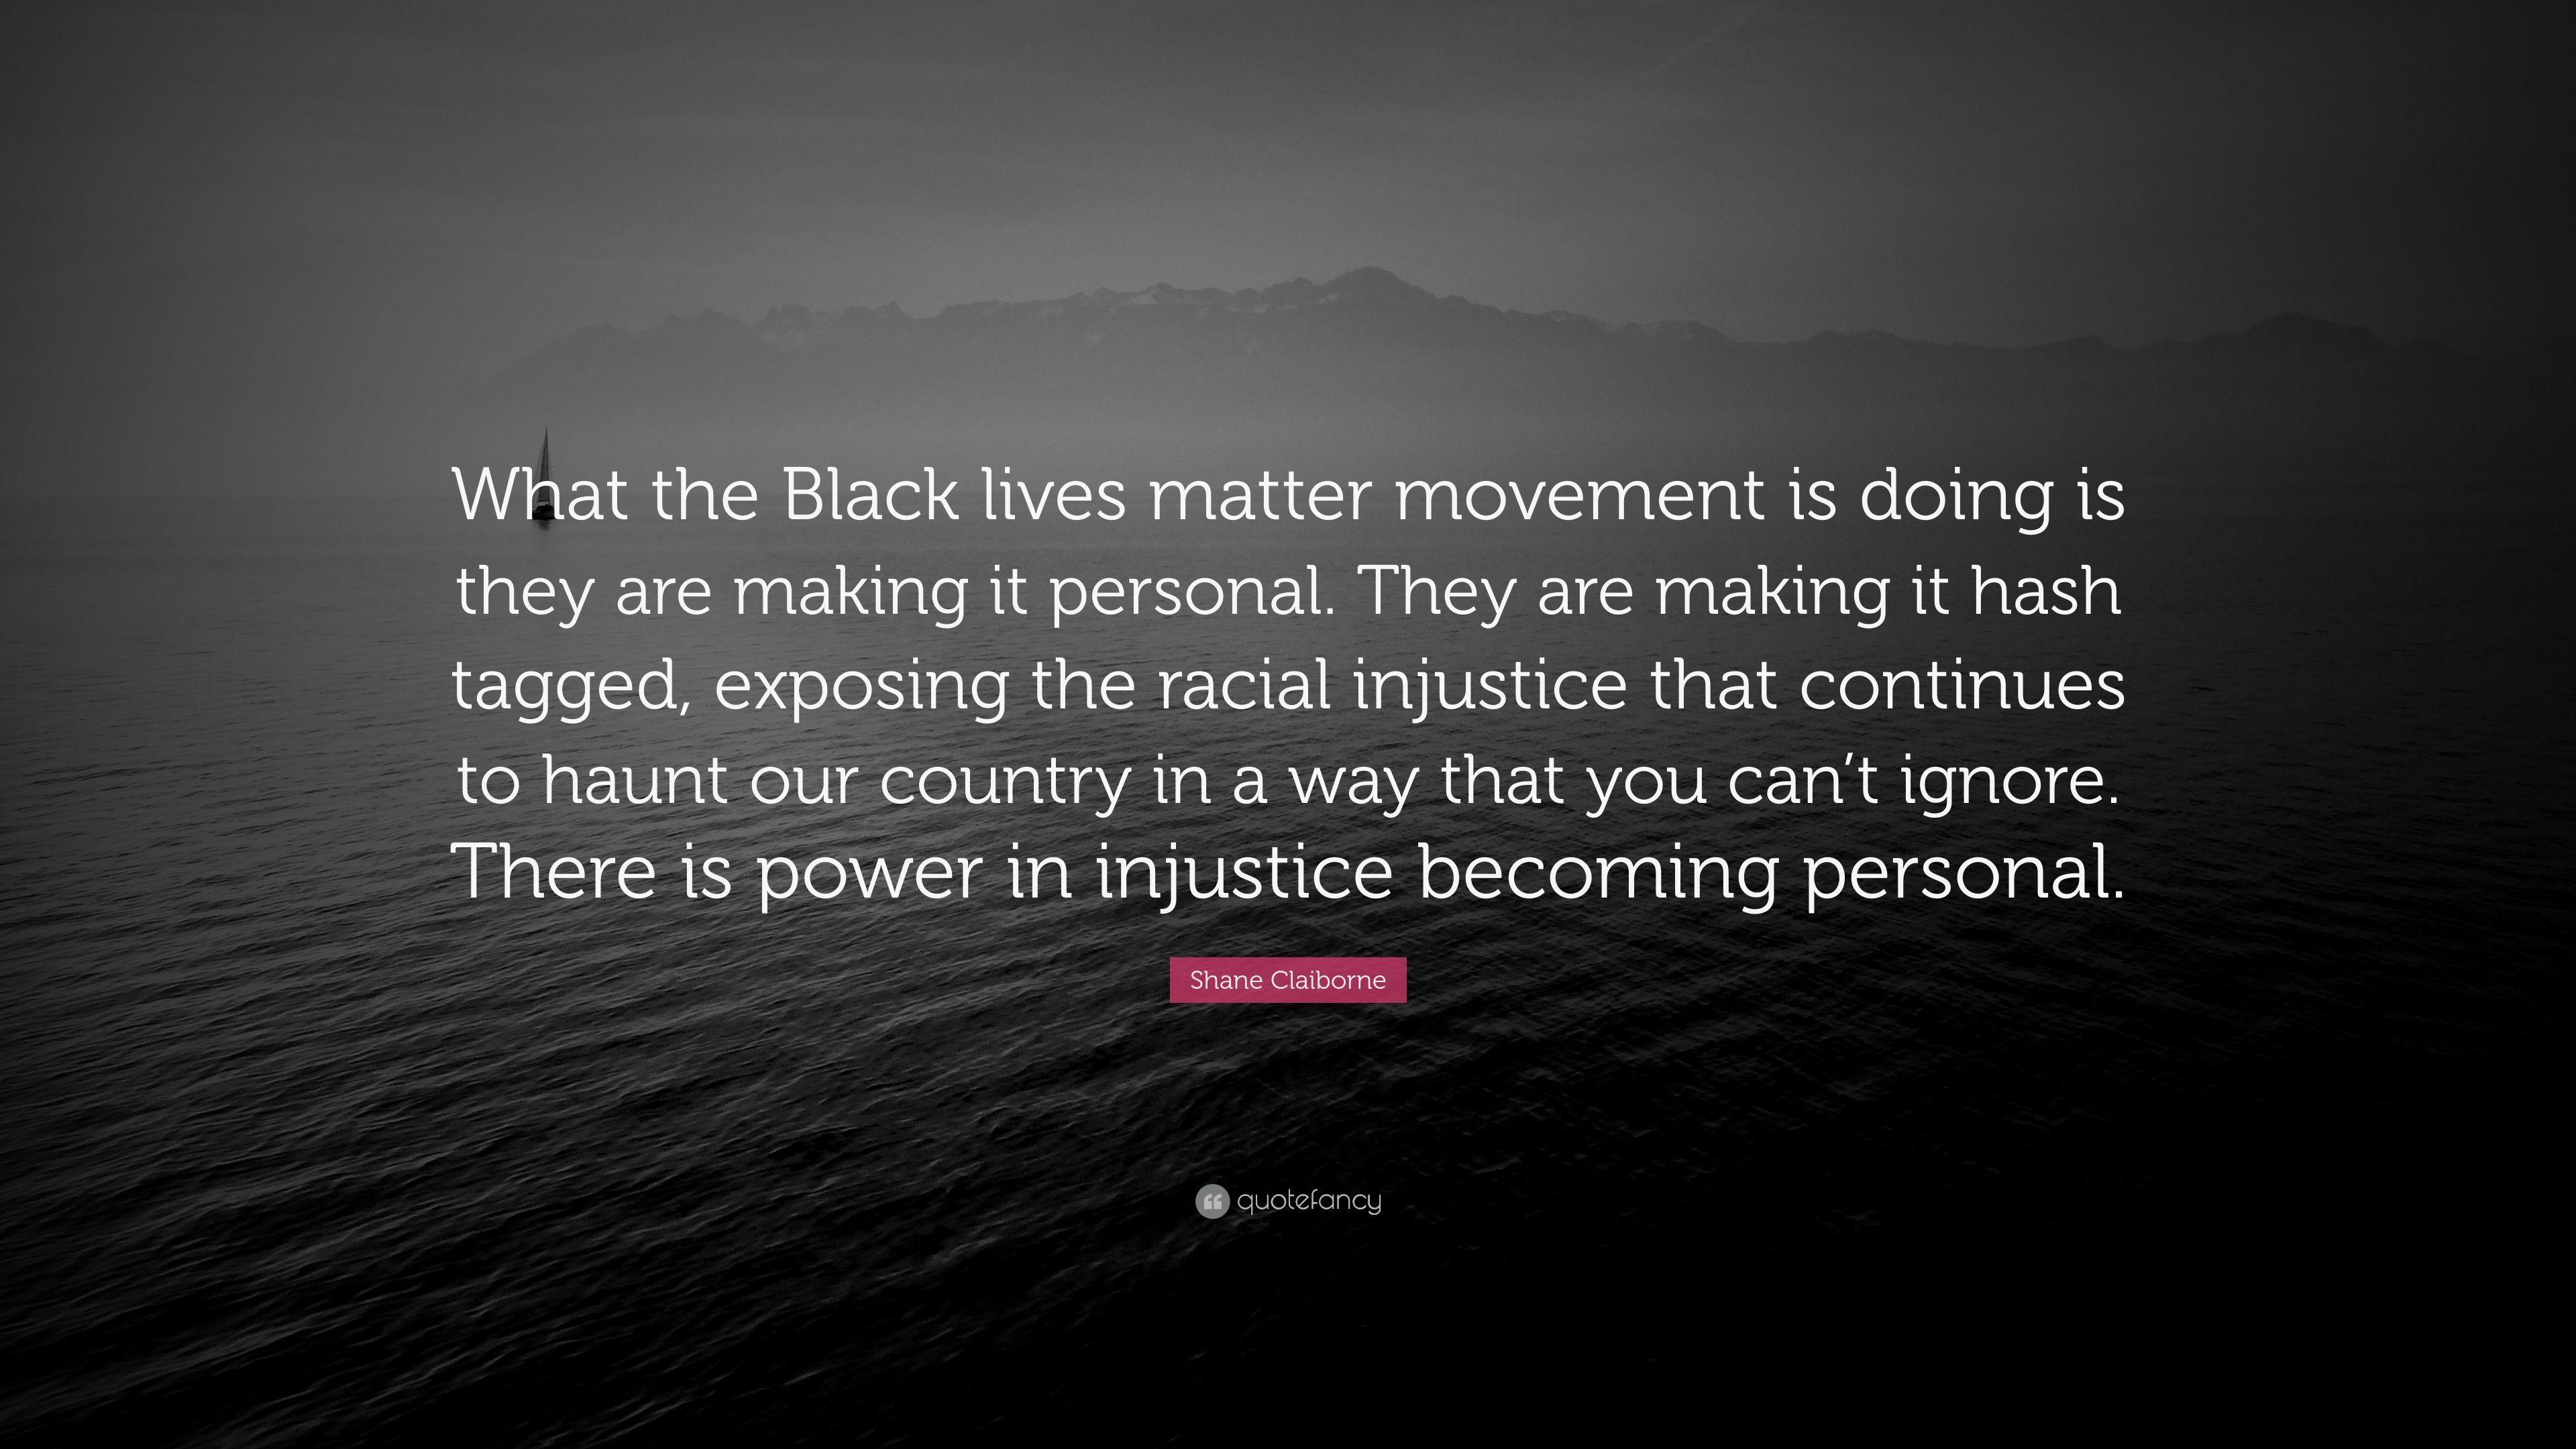 Shane Claiborne Quote: “What the Black lives matter movement is